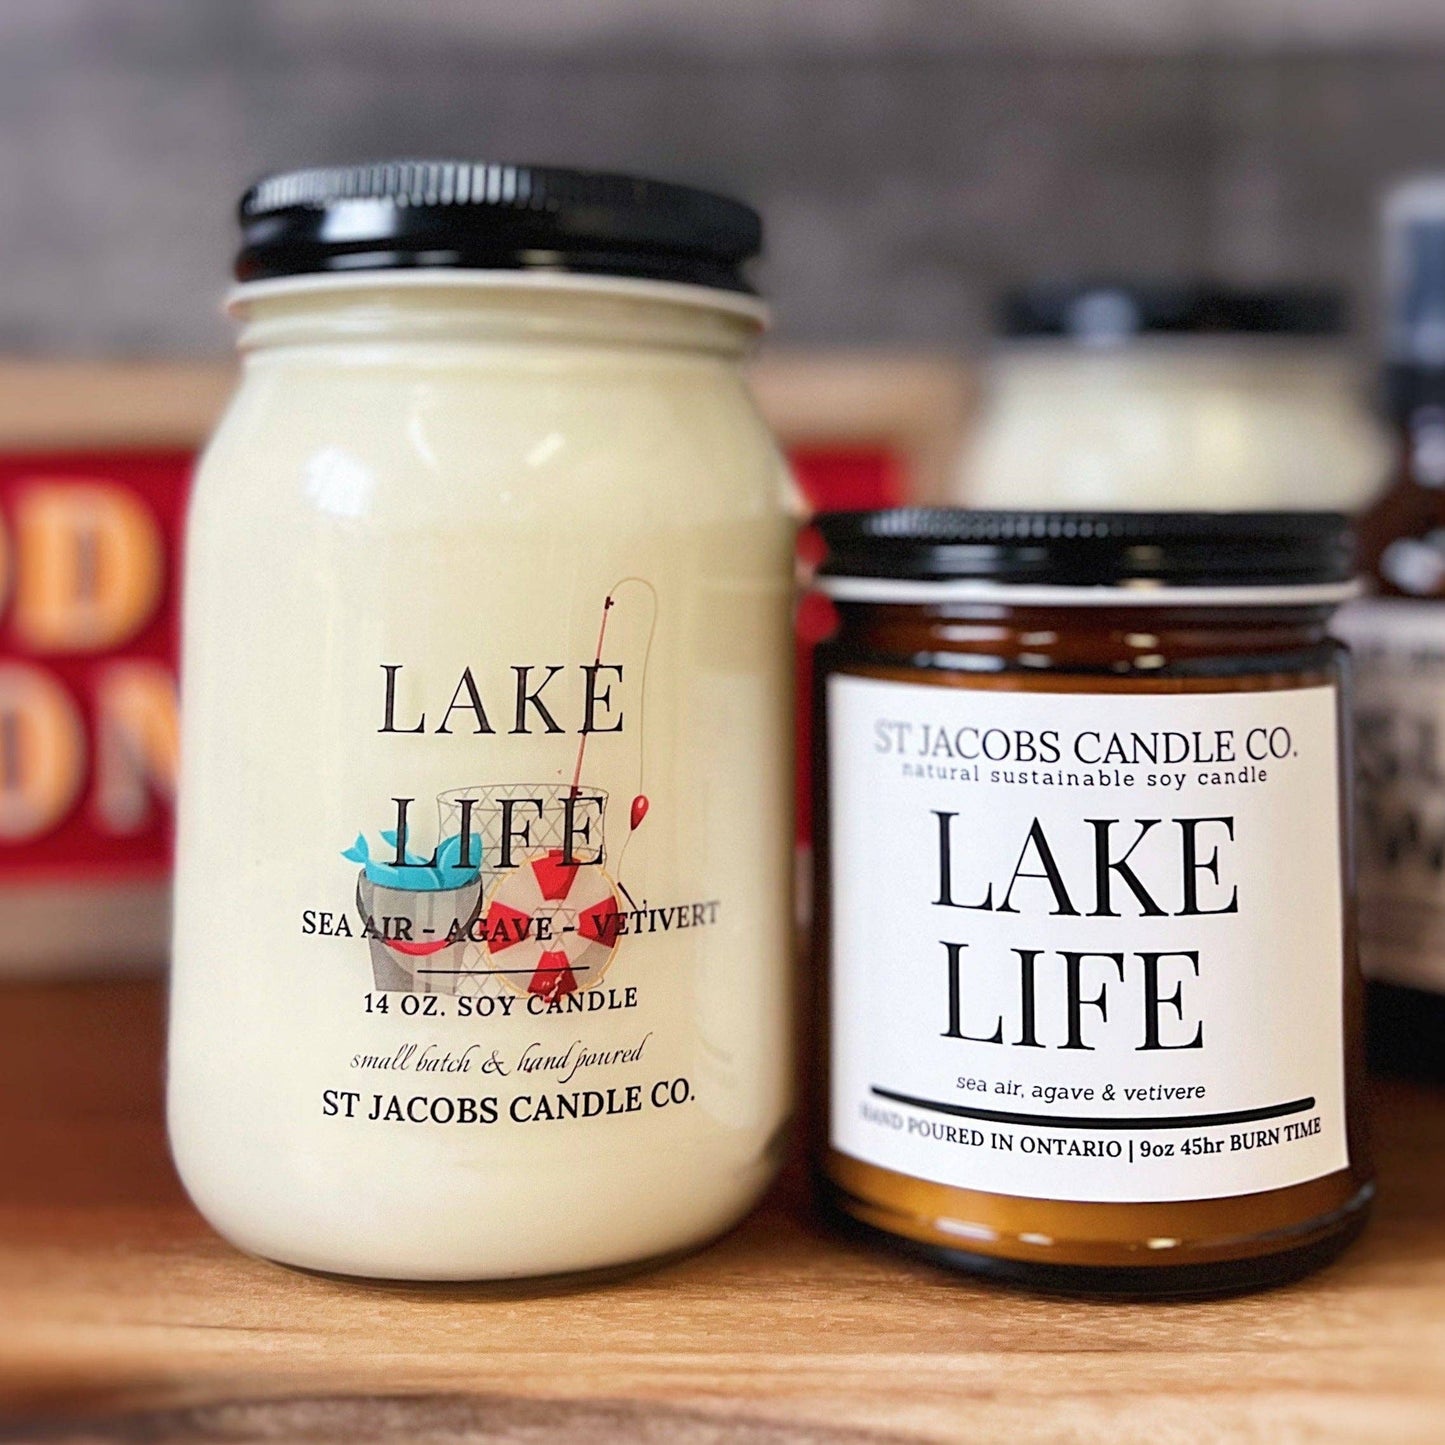 St Jacobs Candle Co. - "LAKE LIFE" Natural Soy Candle